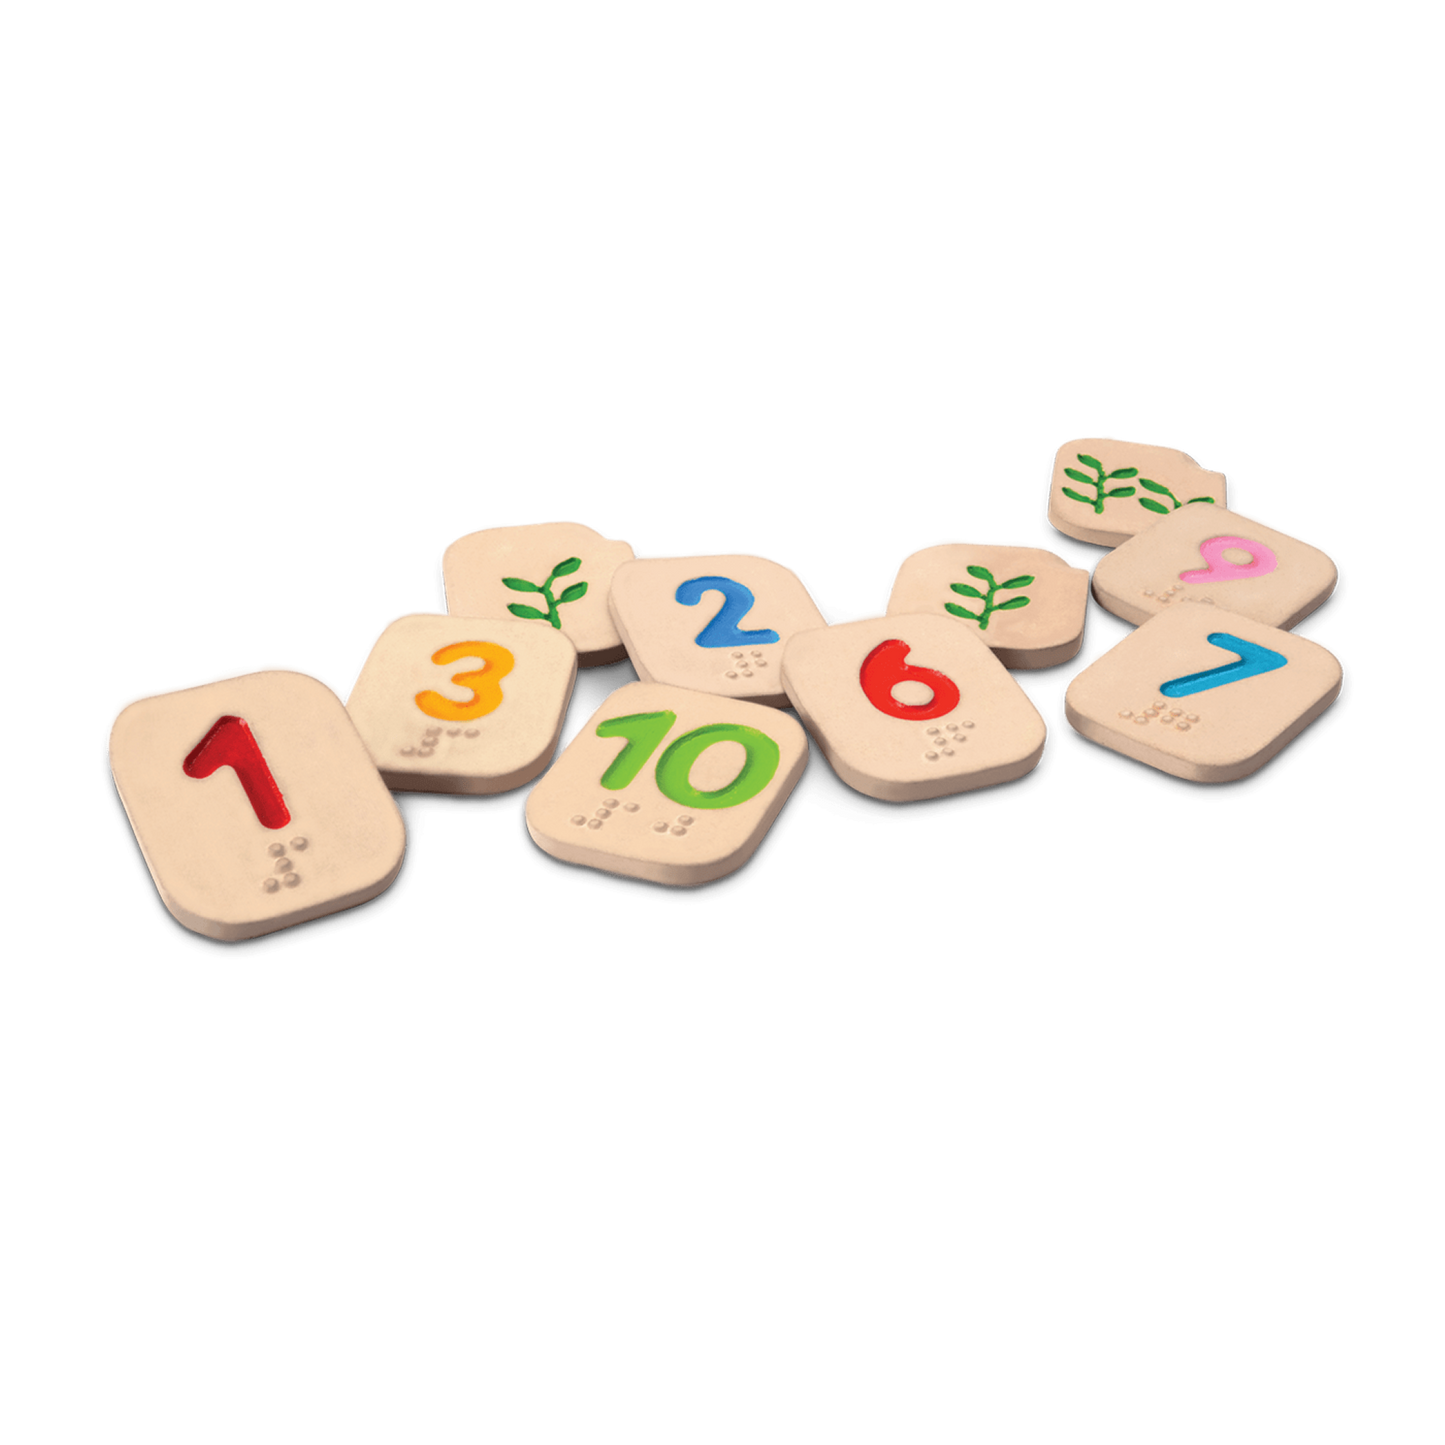 This 10-piece wooden tile set makes learning numbers in Braille as easy as 1-2-3! The vibrantly colored set features numbers 1-10 and the corresponding Braille cells. The other side features impressed leaf illustrations to help children count.